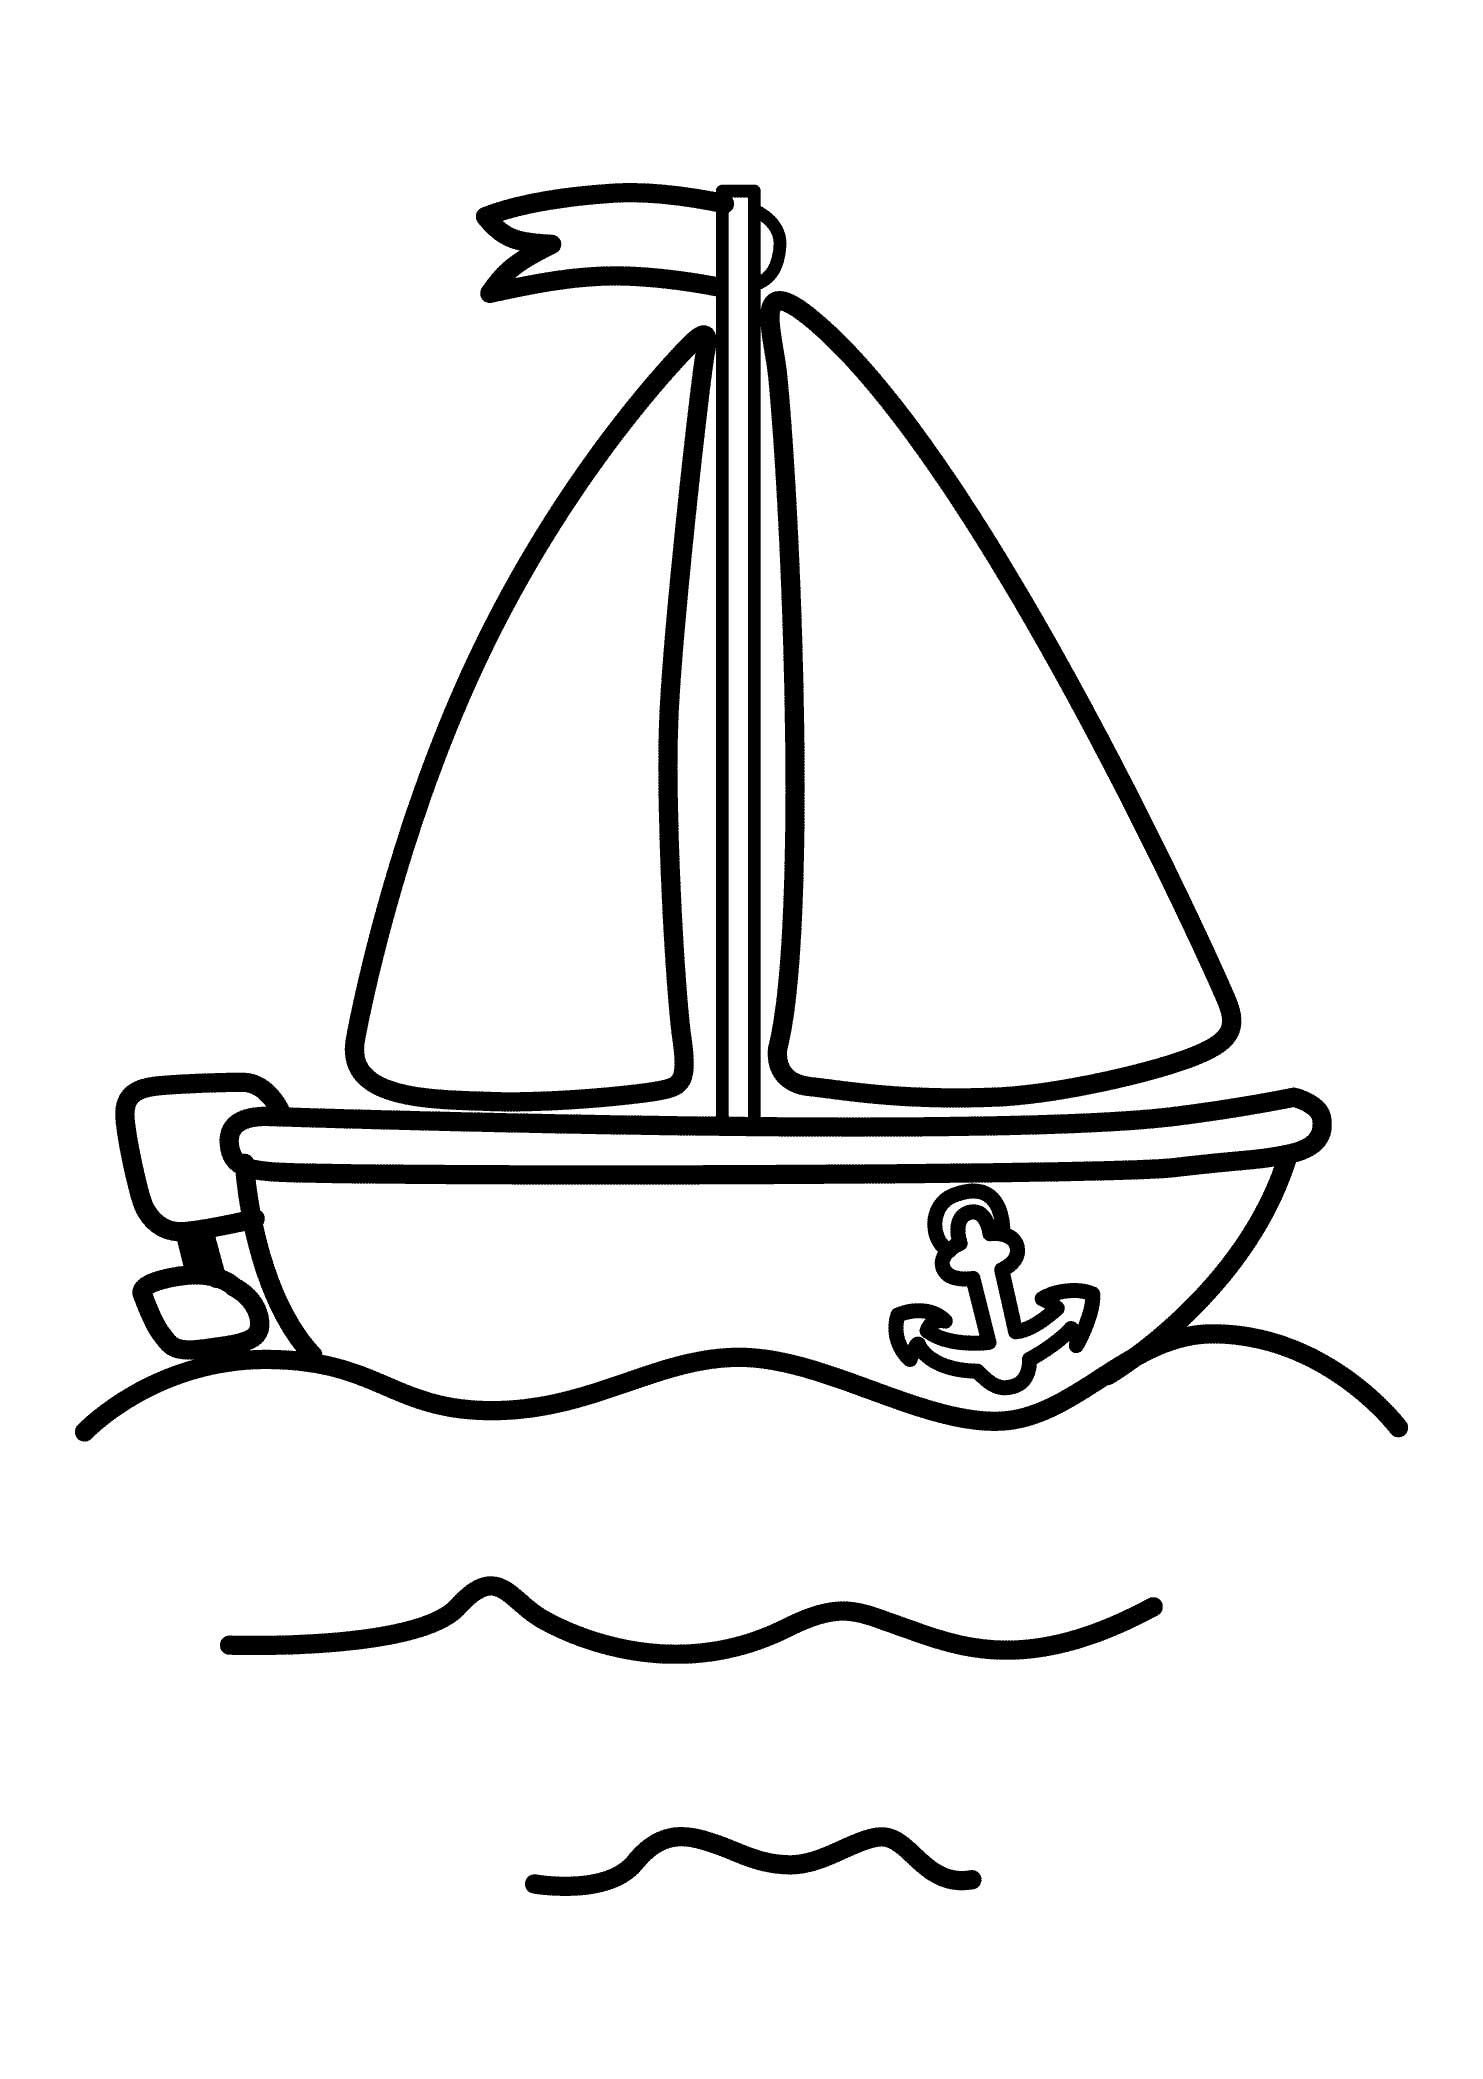 Pinshreya Thakur On Free Coloring Pages | Coloring Pages For - Free Printable Boat Pictures